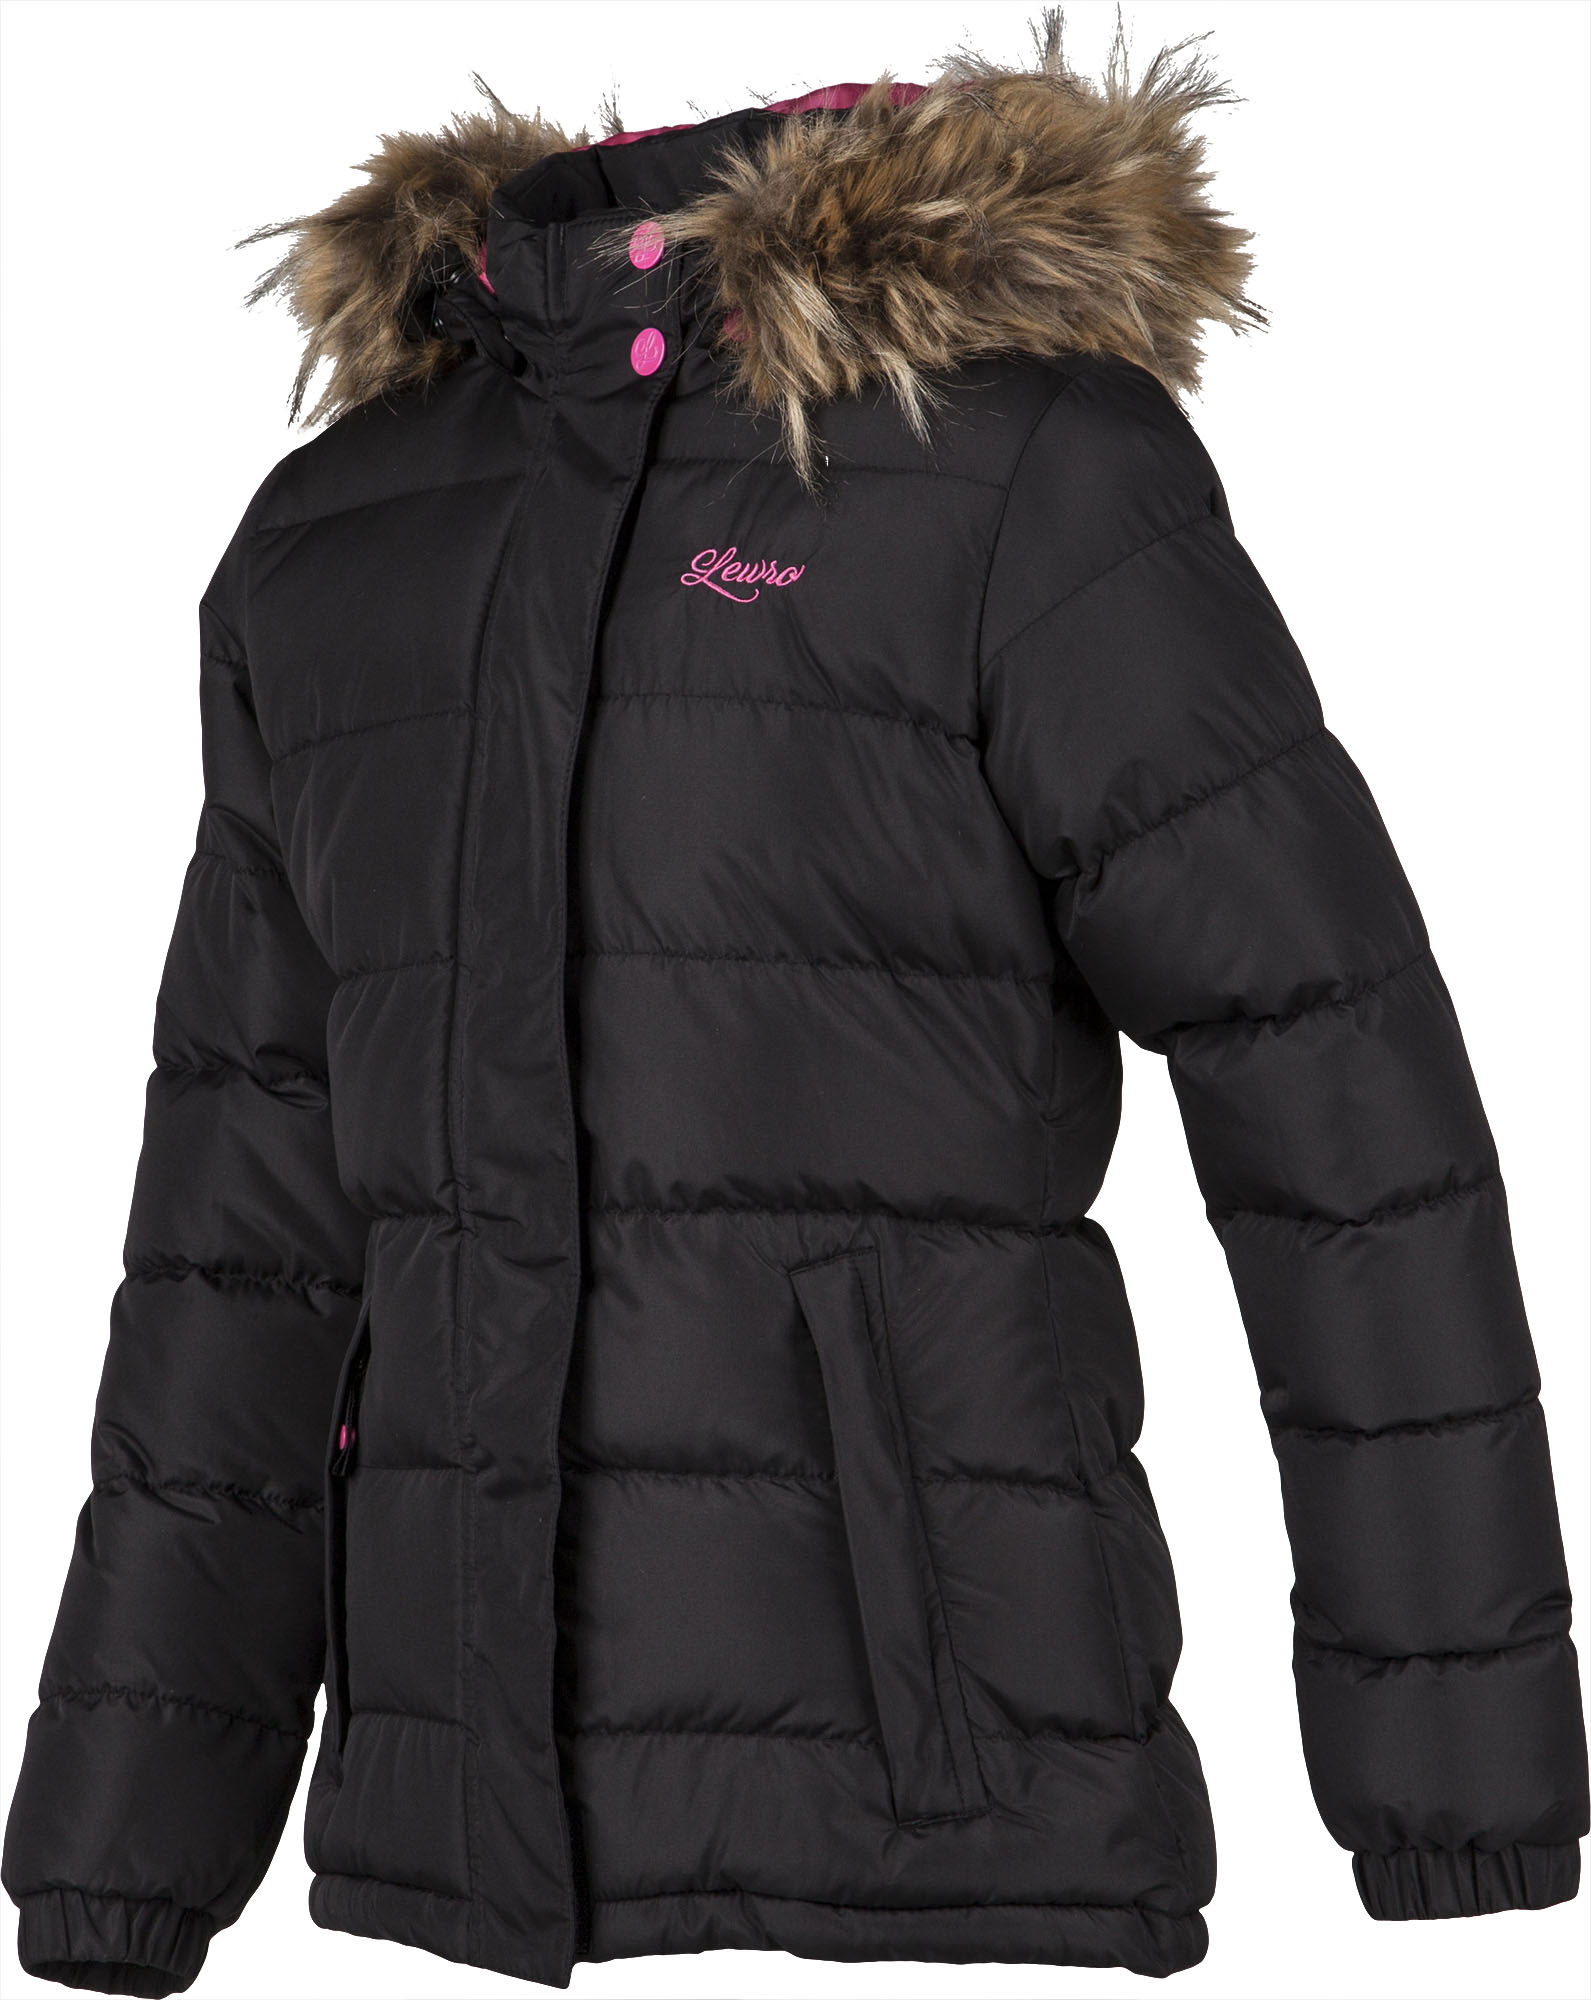 Girls’ quilted jacket